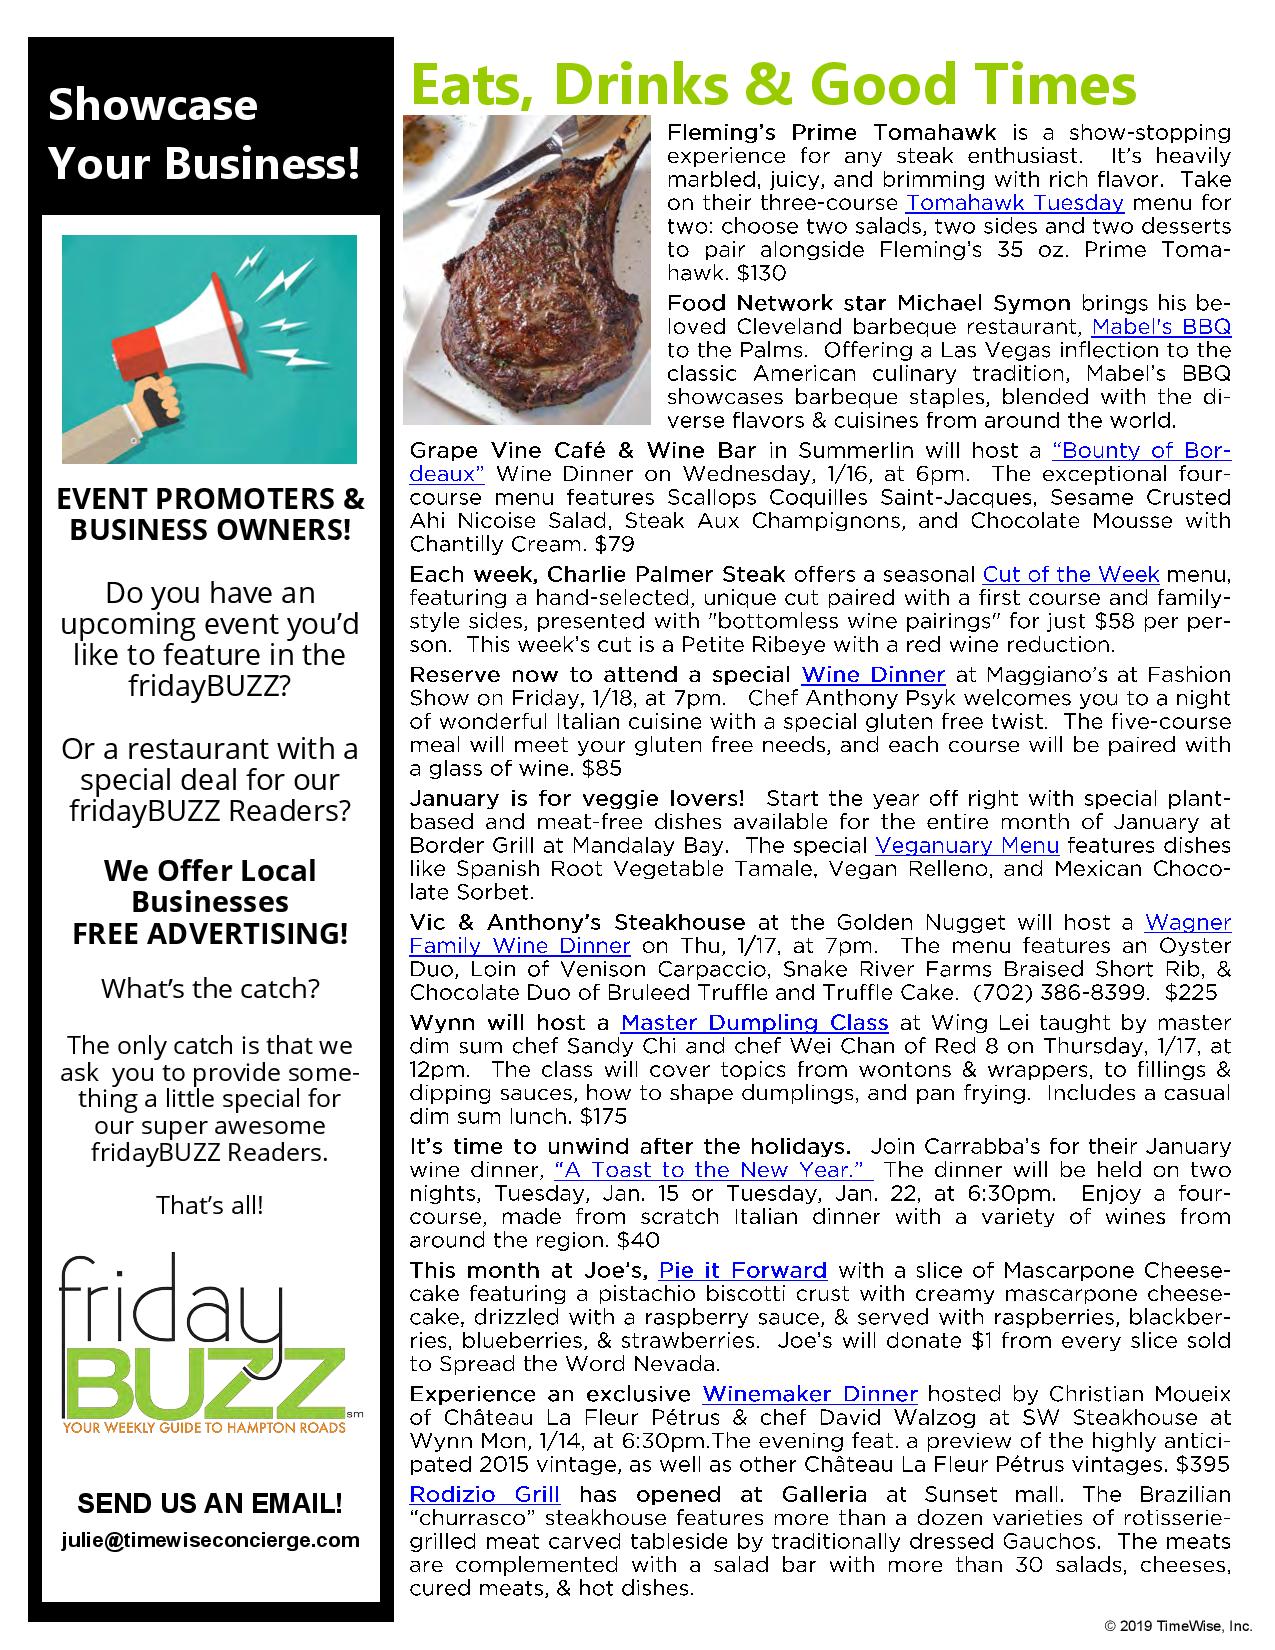 Berkshire-Hathaway-HomeServices-fridaybuzz Jan 11 2019-page-003